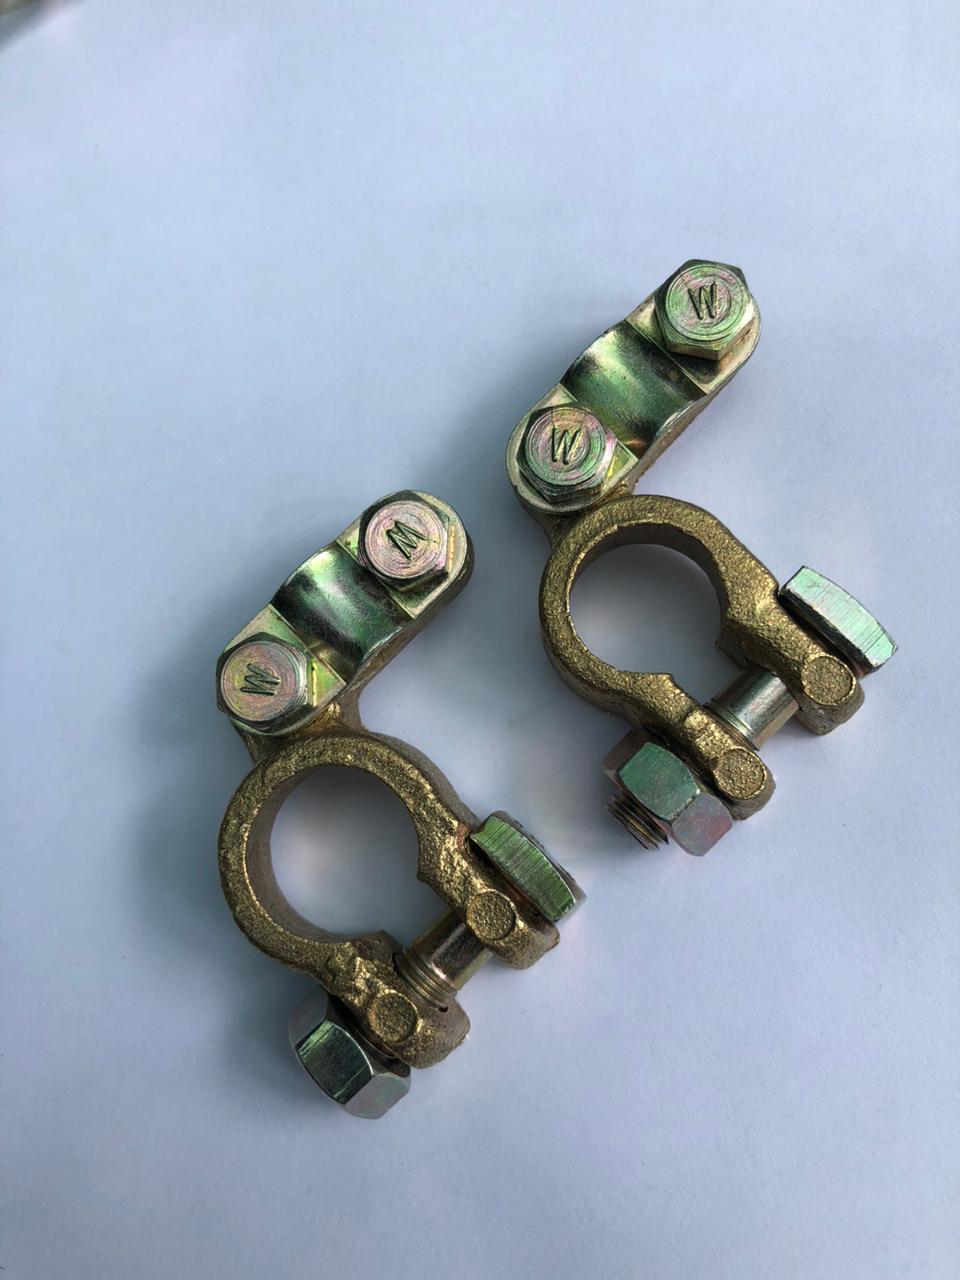 2-Piece Universal Battery Terminals Connector Clamps Set CTC-310-battery terminals-wirewire- - www.wirewire.co.za